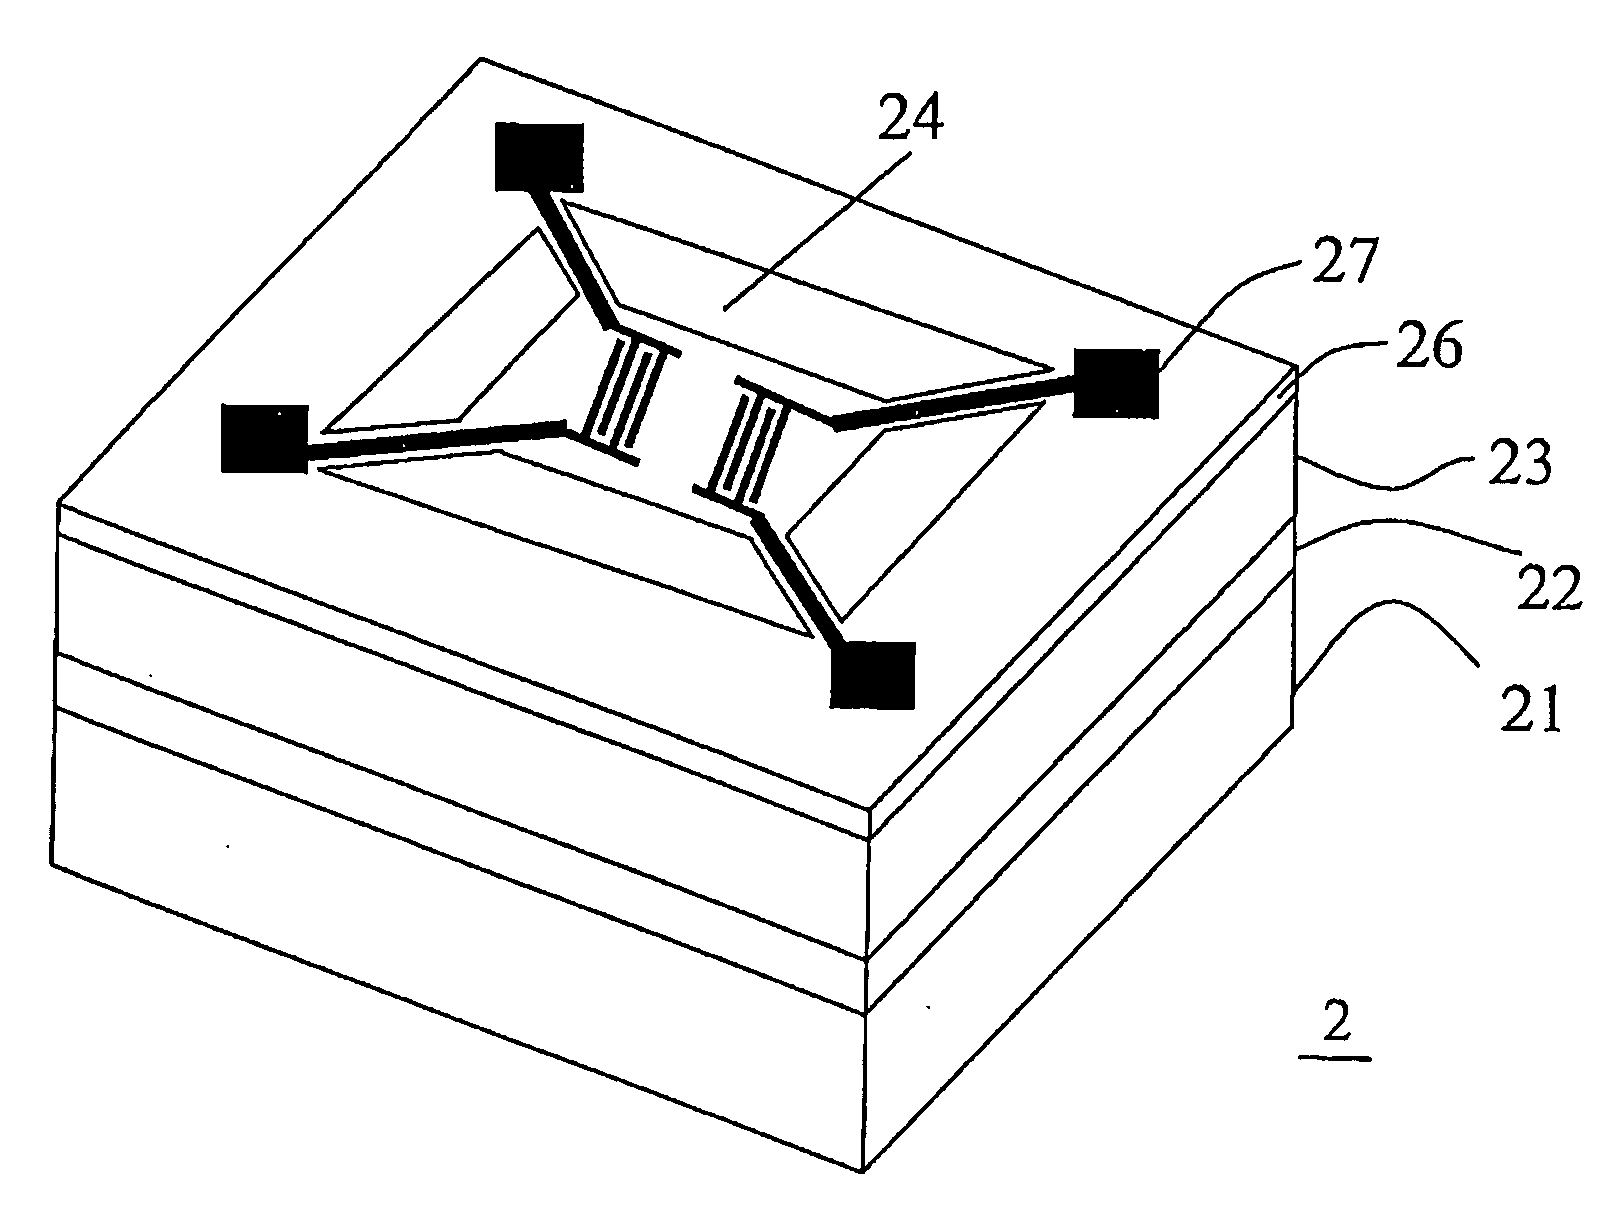 Surface acoustic wave device and method for fabricating the same